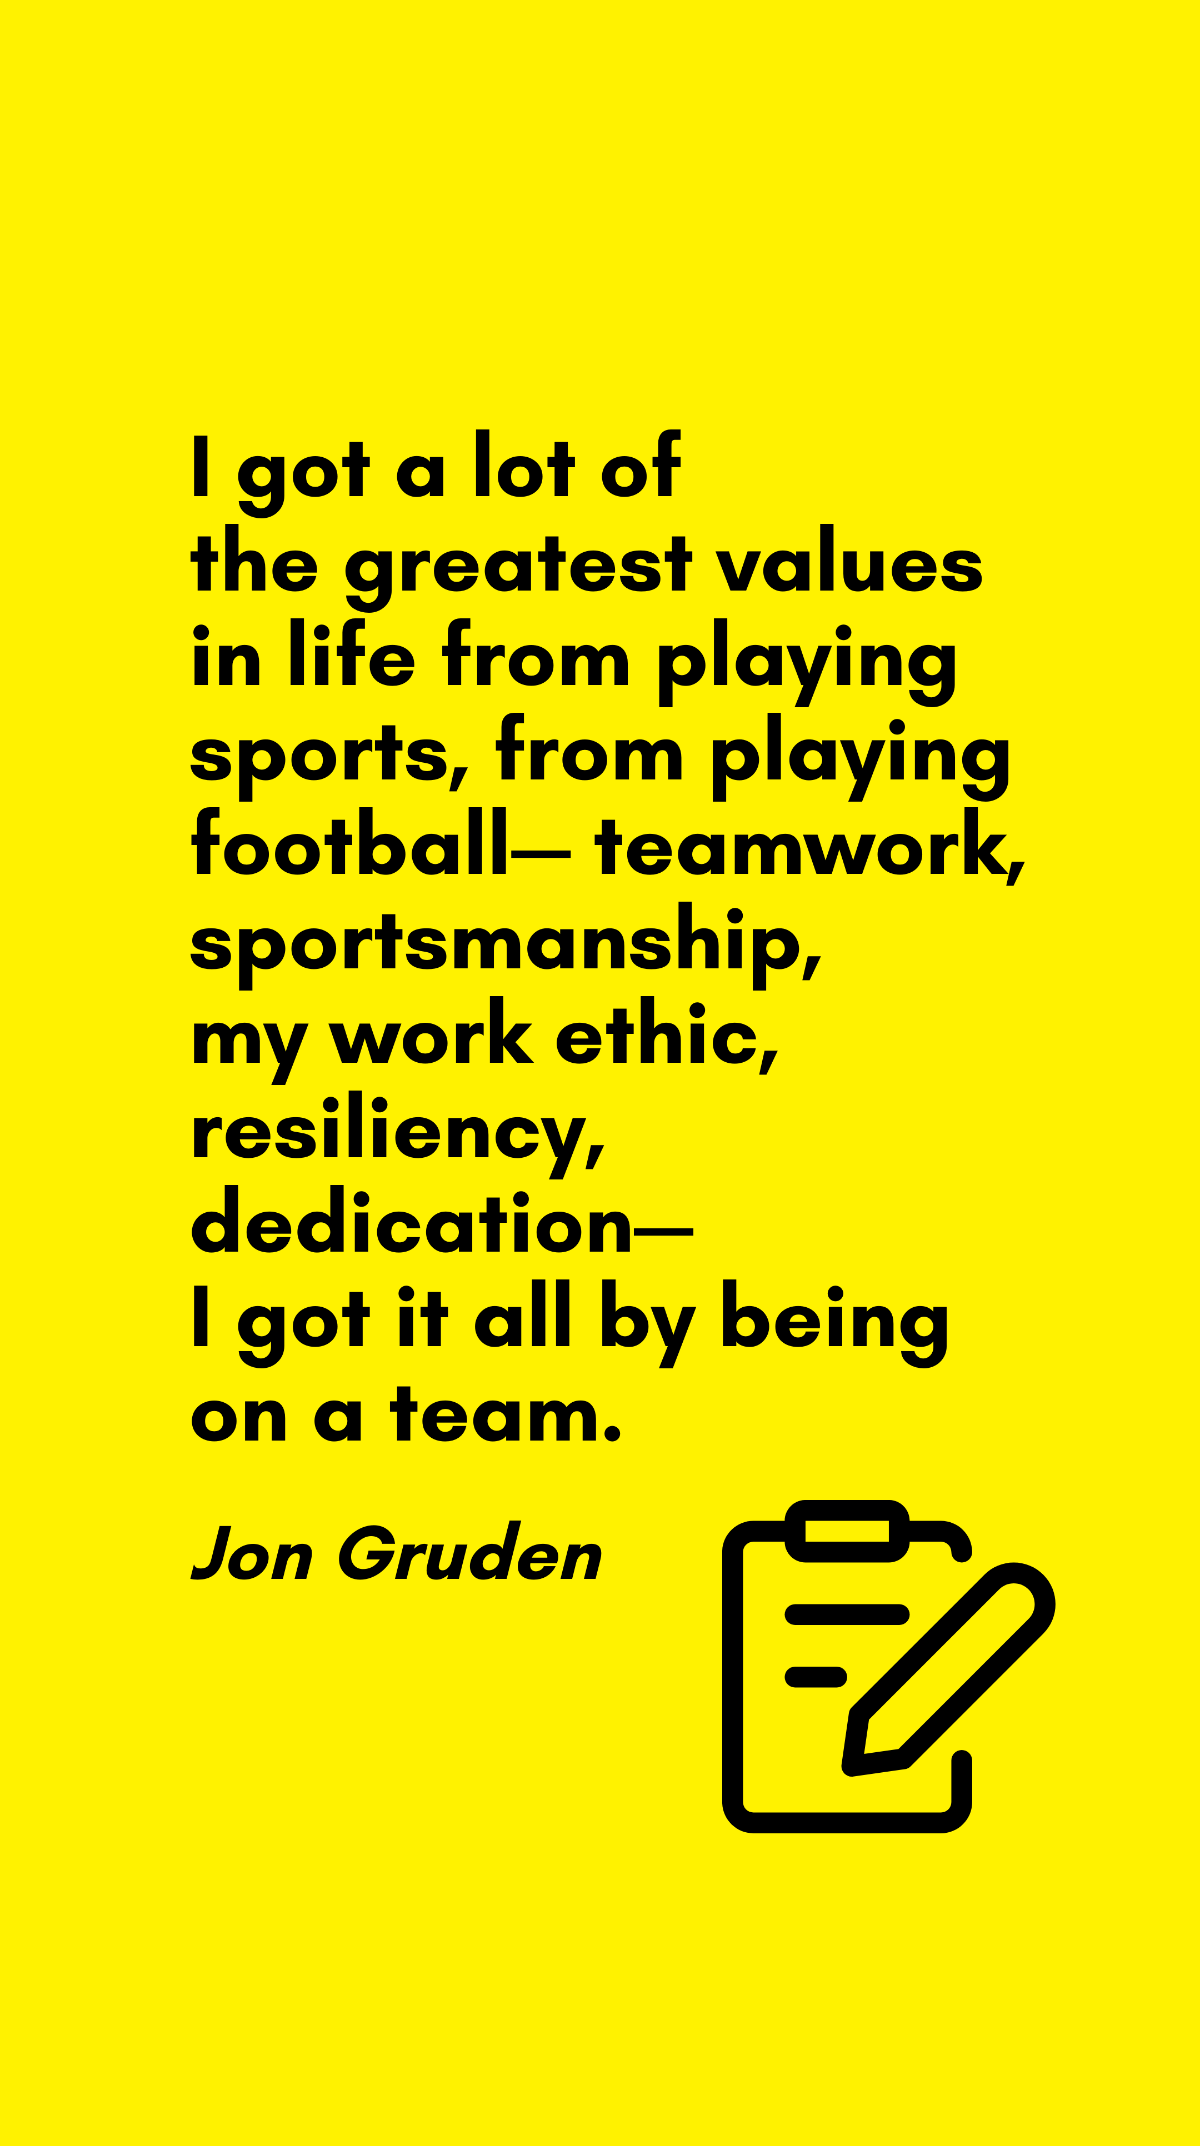 Free Jon Gruden - I got a lot of the greatest values in life from playing sports, from playing football - teamwork, sportsmanship, my work ethic, resiliency, dedication - I got it all by being on a team. T